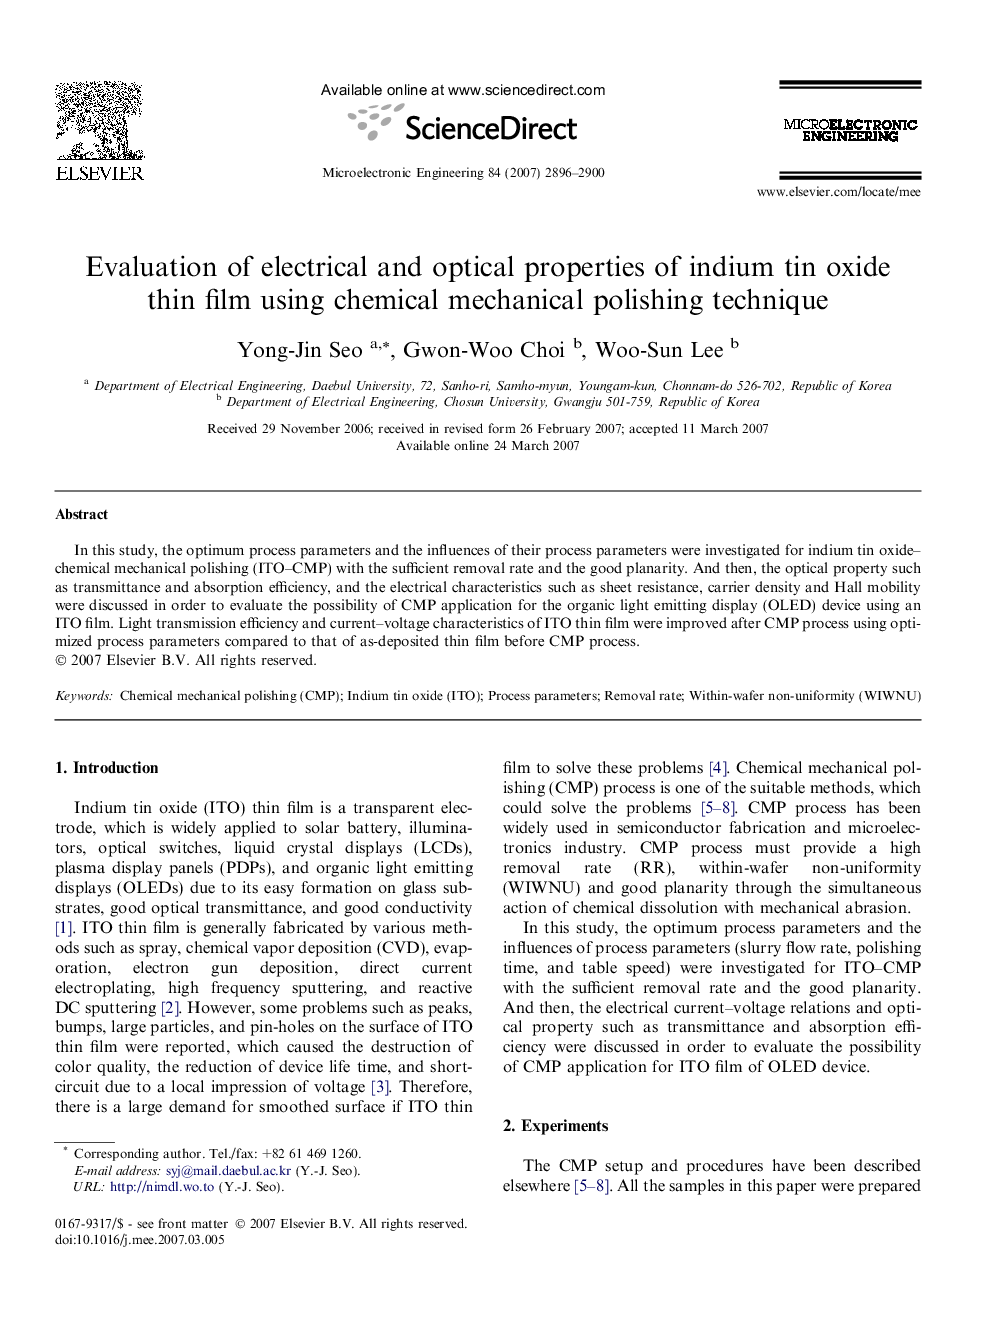 Evaluation of electrical and optical properties of indium tin oxide thin film using chemical mechanical polishing technique